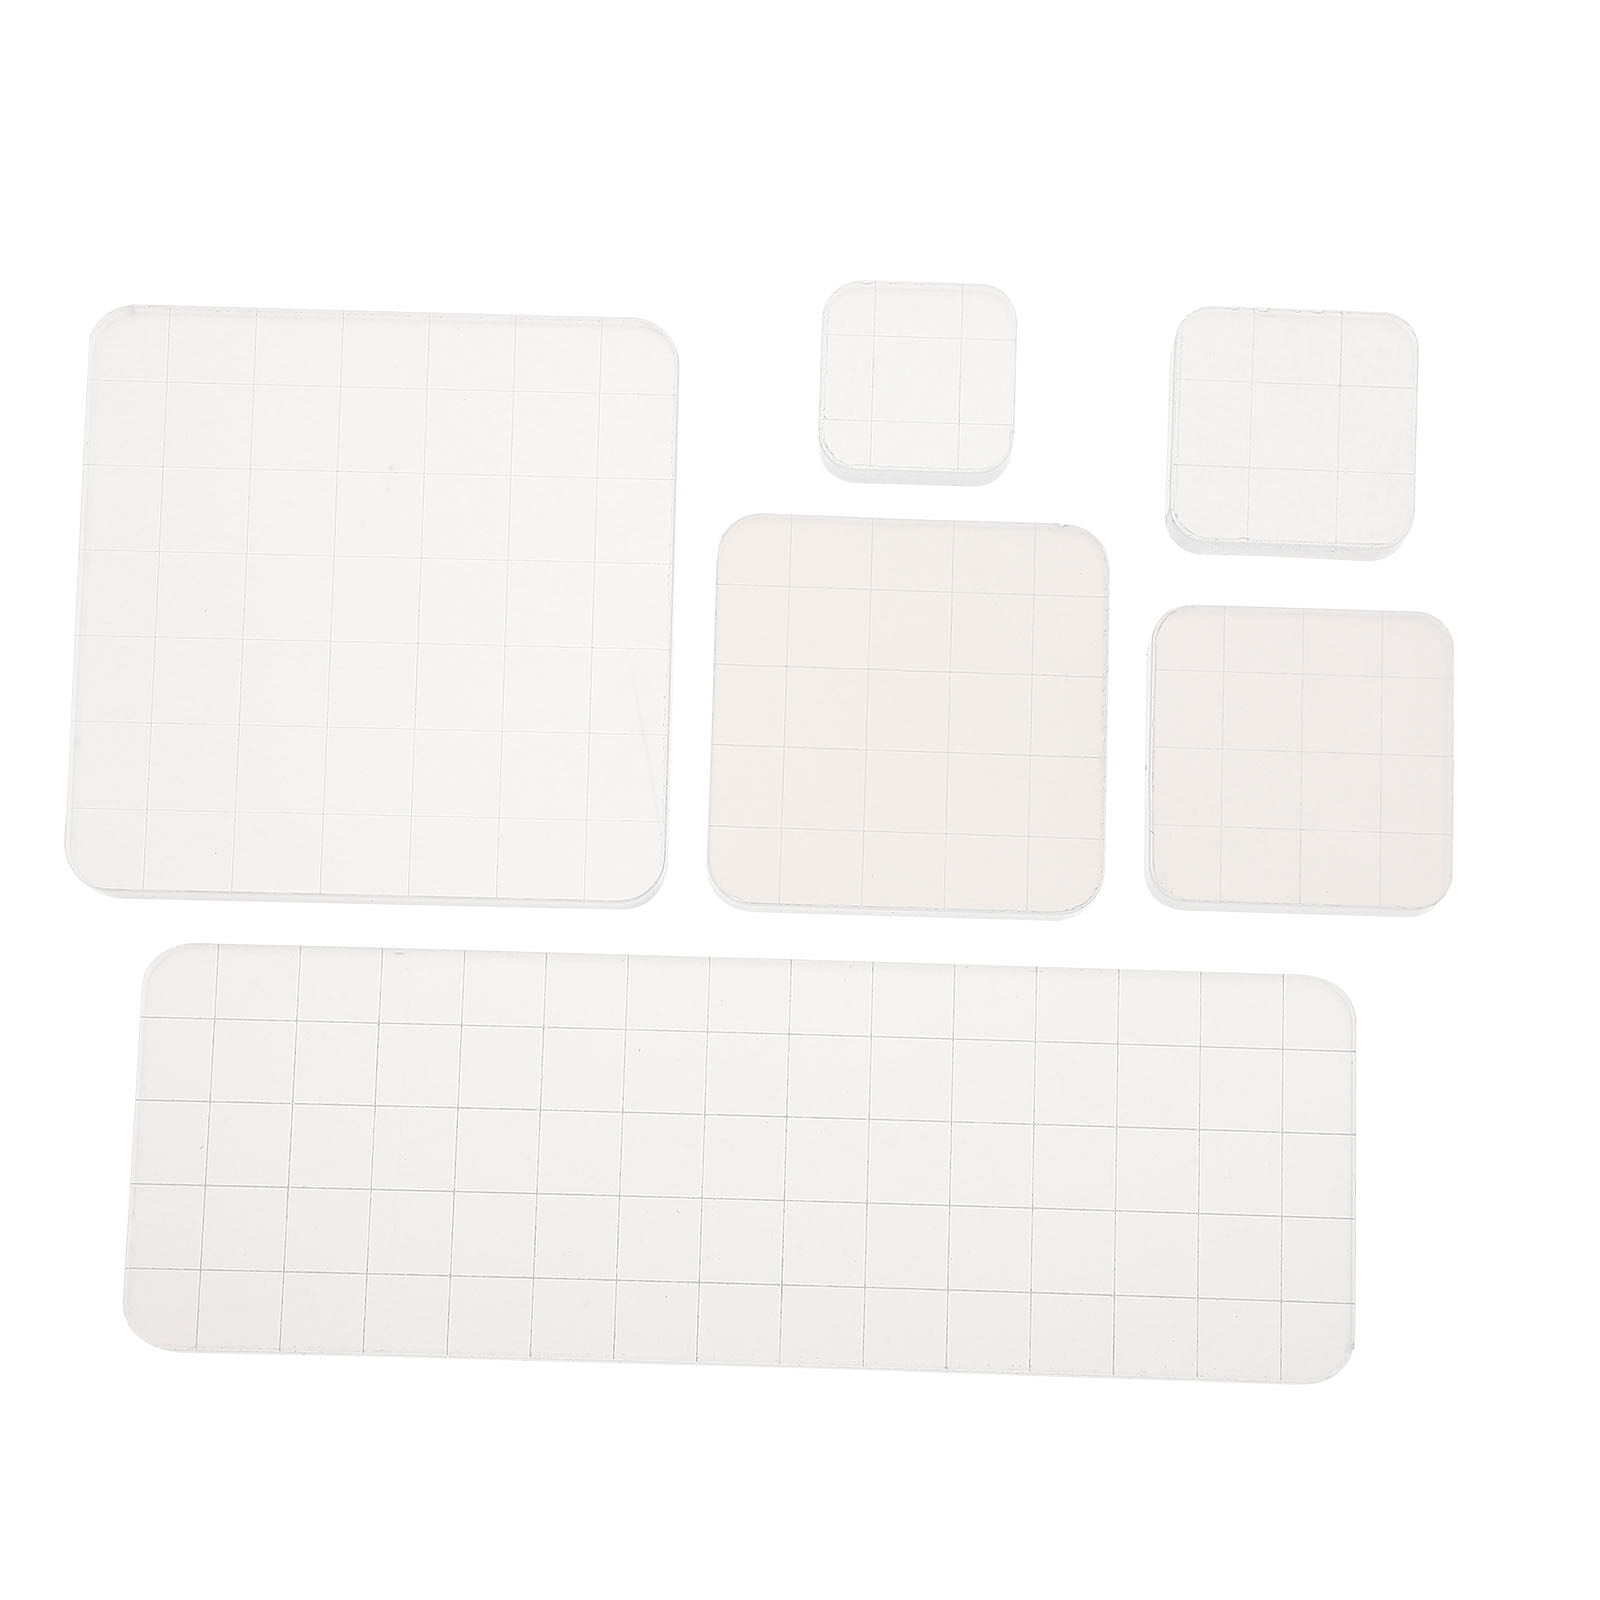 5 Clear Acrylic Block Set - stamp block set -unmounted stamp blocks  Crafter's Companion